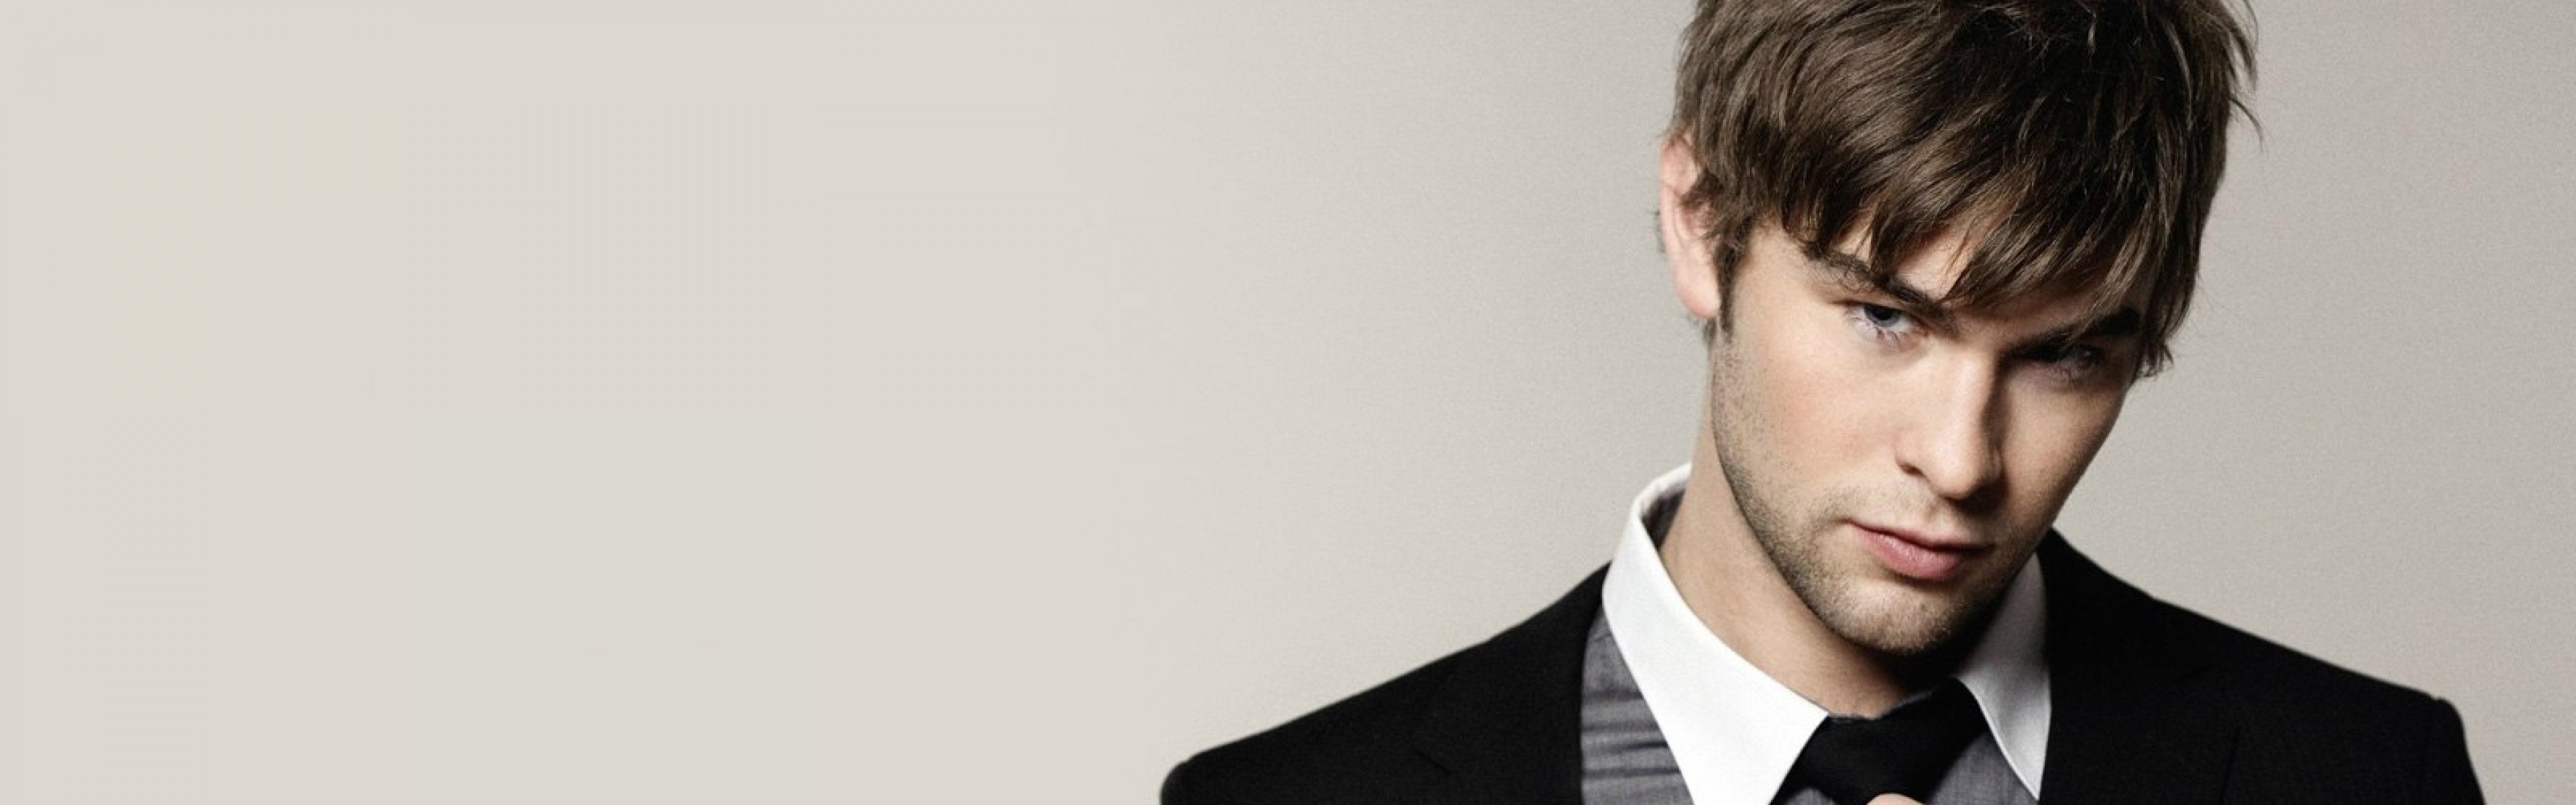 3840x1200  Wallpaper chace crawford, tuxedo, style, gesture, look